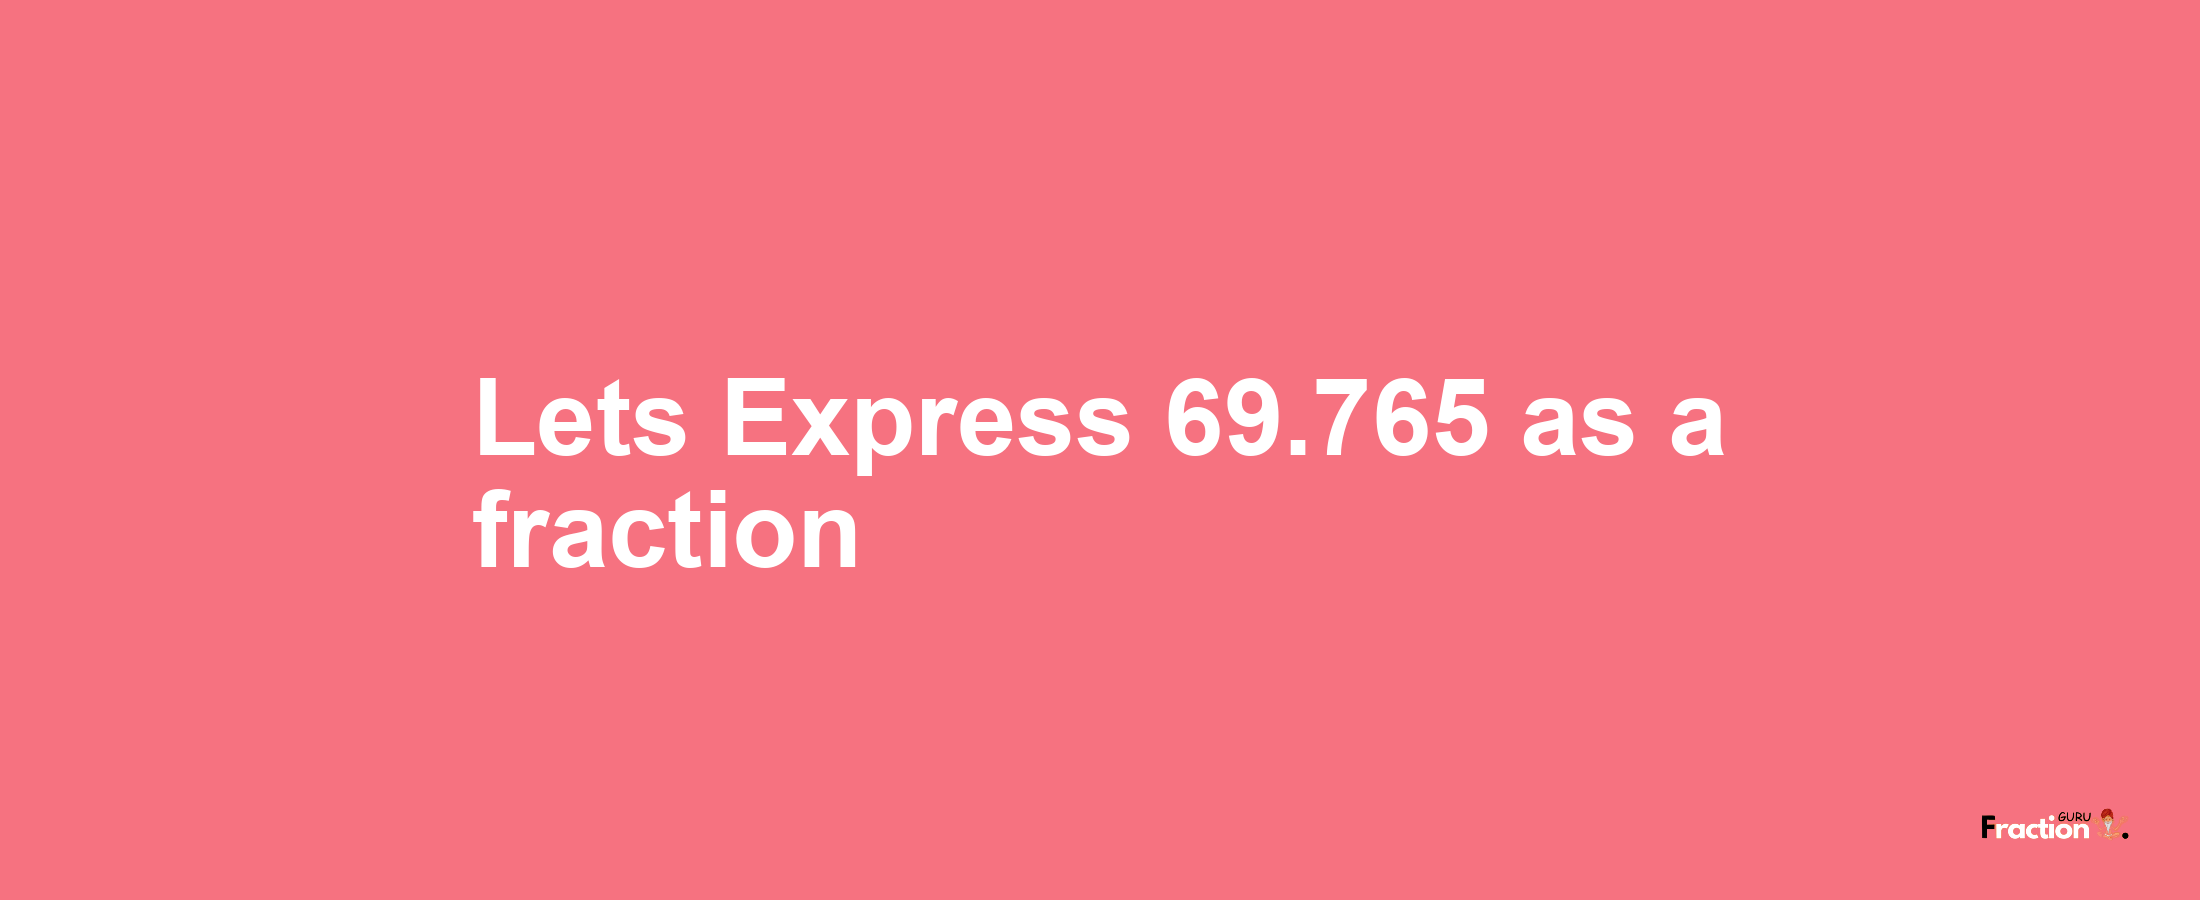 Lets Express 69.765 as afraction